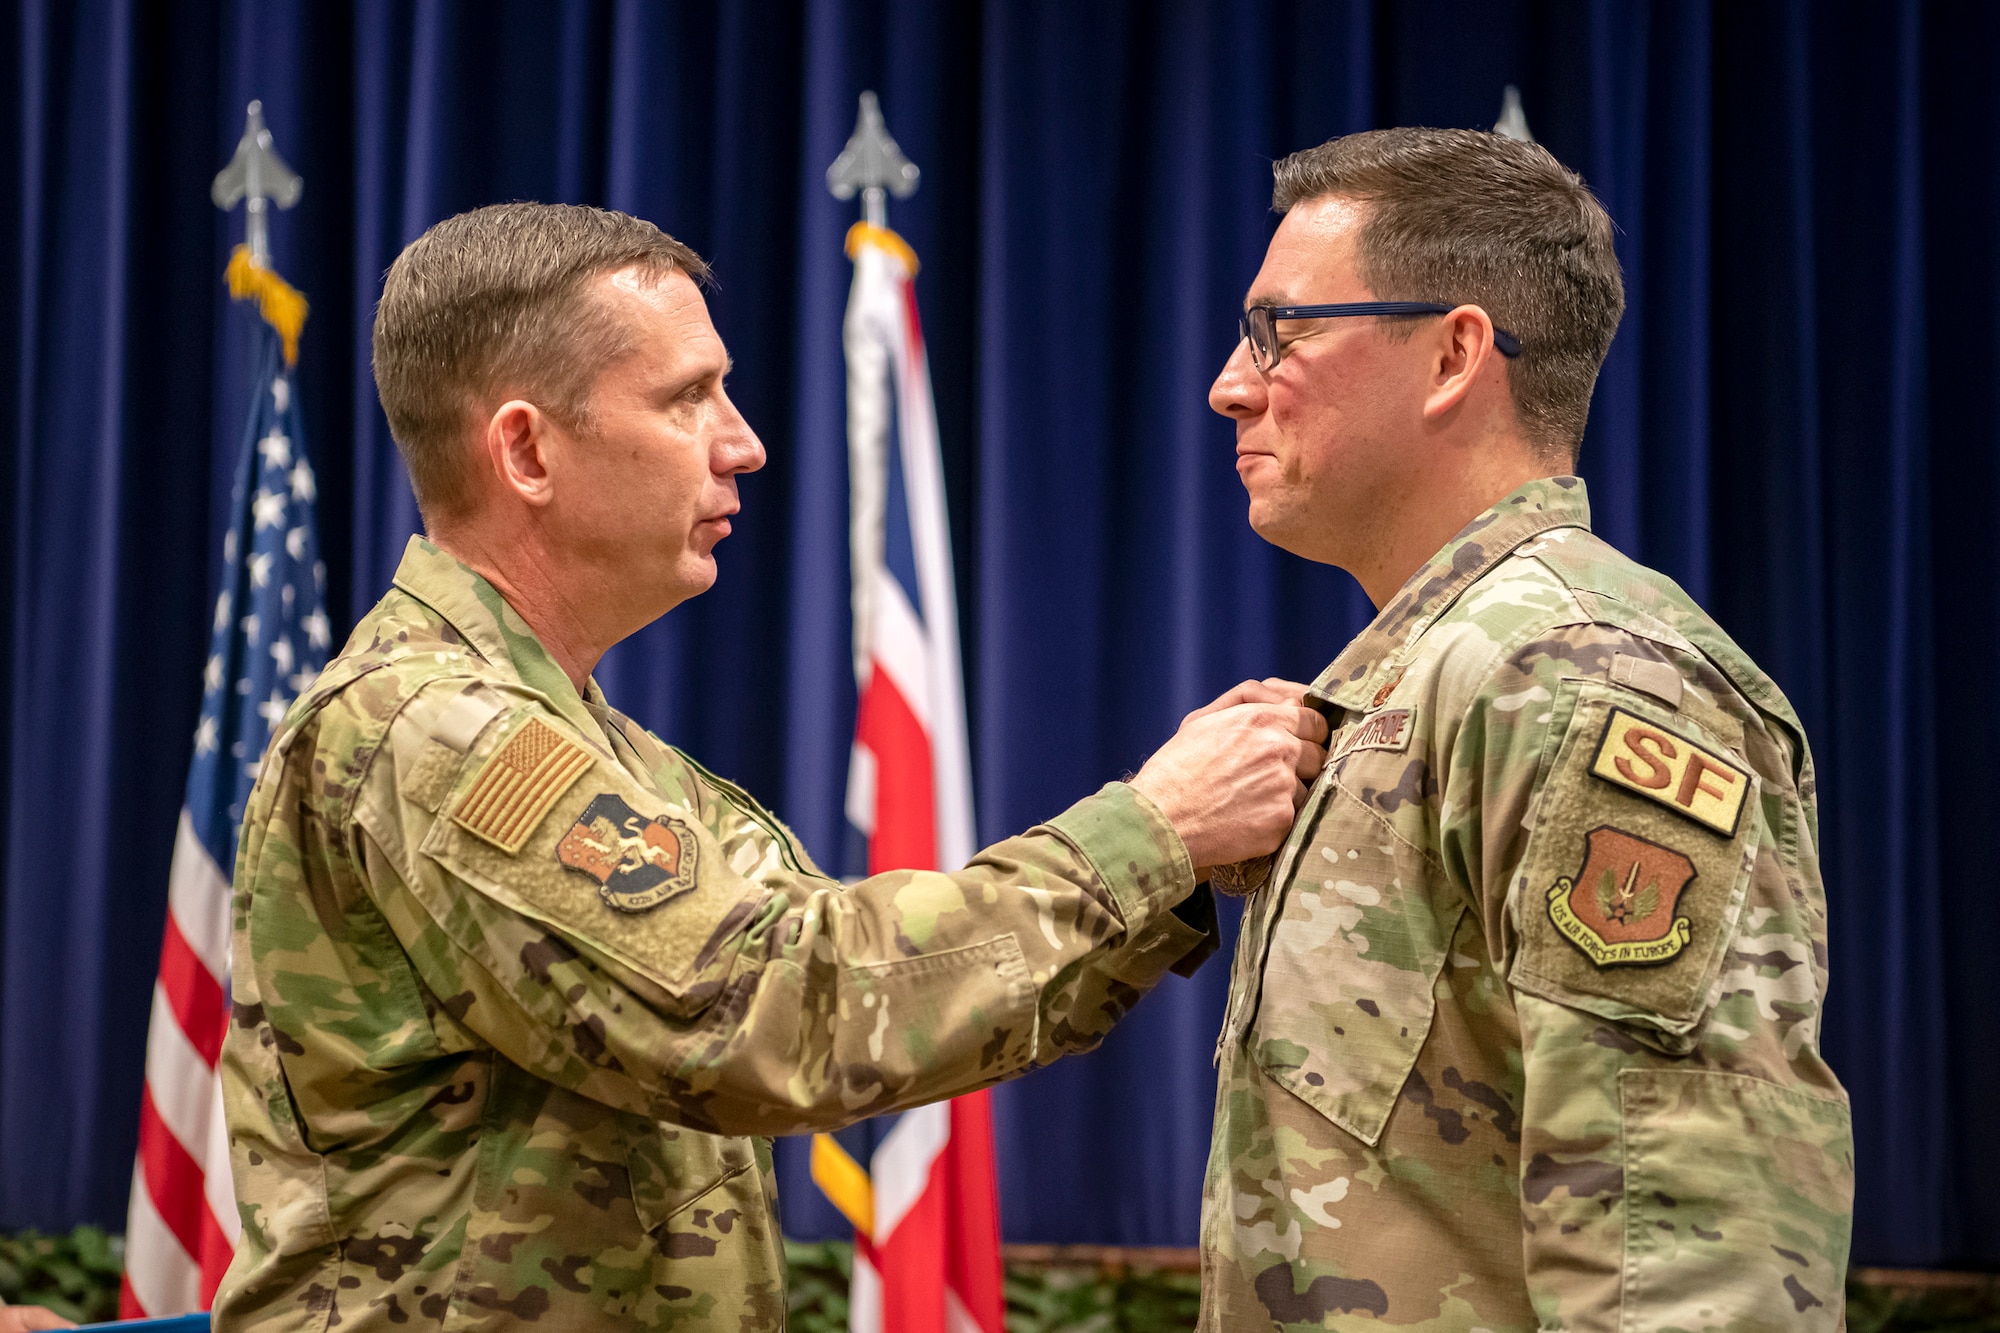 U.S. Air Force Col. Jon T. Hannah, left, 422d Air Base Group commander, pins a meritorious service medal onto Maj. Thomas W. Uhl, 422d Security Forces Squadron commander, during a change of command ceremony at RAF Croughton, England, June 16, 2022. Throughout his command, Uhl led over 200 Defenders, Ministry of Defence Police and Guard along with augmentees in providing security for the U.S. Air Force’s only Bomber Forward Operation location and protection level 1 resources within the United Kingdom. (U.S. Air Force photo by Staff Sgt. Eugene Oliver)